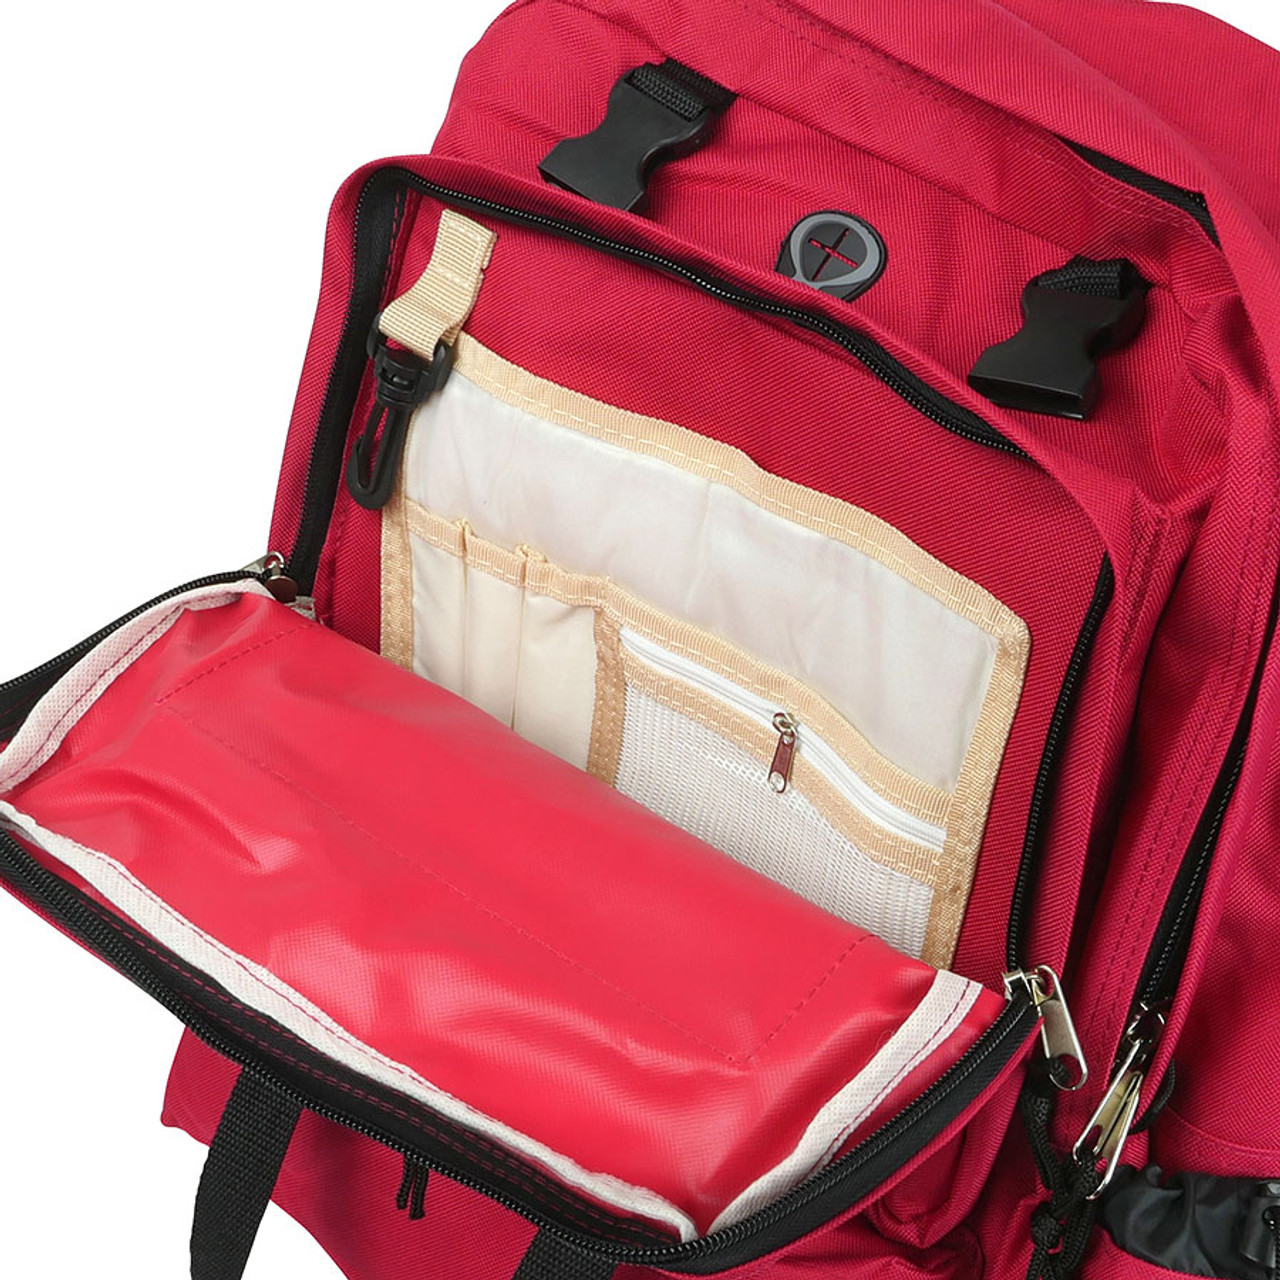 Deluxe Reponder Bags, Gear Containers Survival and Aid Emergency Medical - - Response Backpack Bag Backpacks - Nylon Kit - First Red EMT